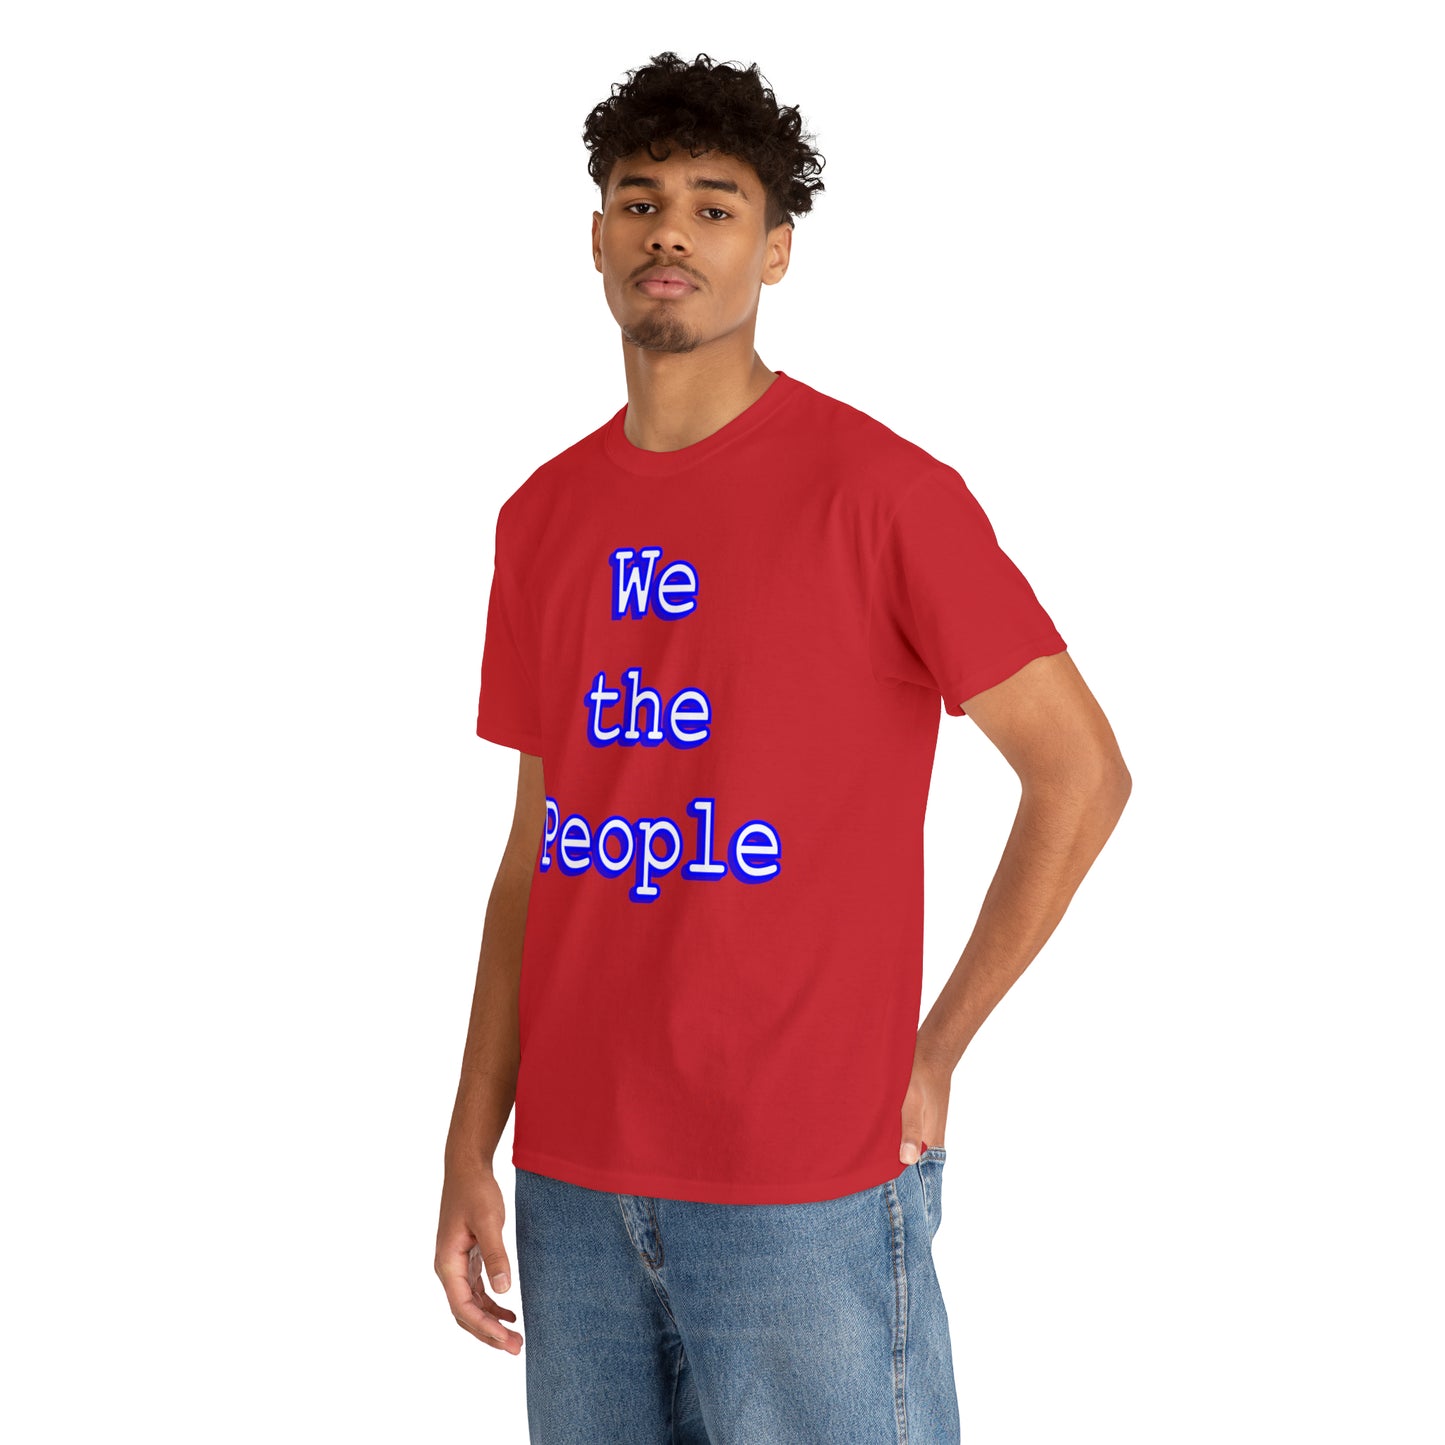 We The People - Hurts Shirts Collection